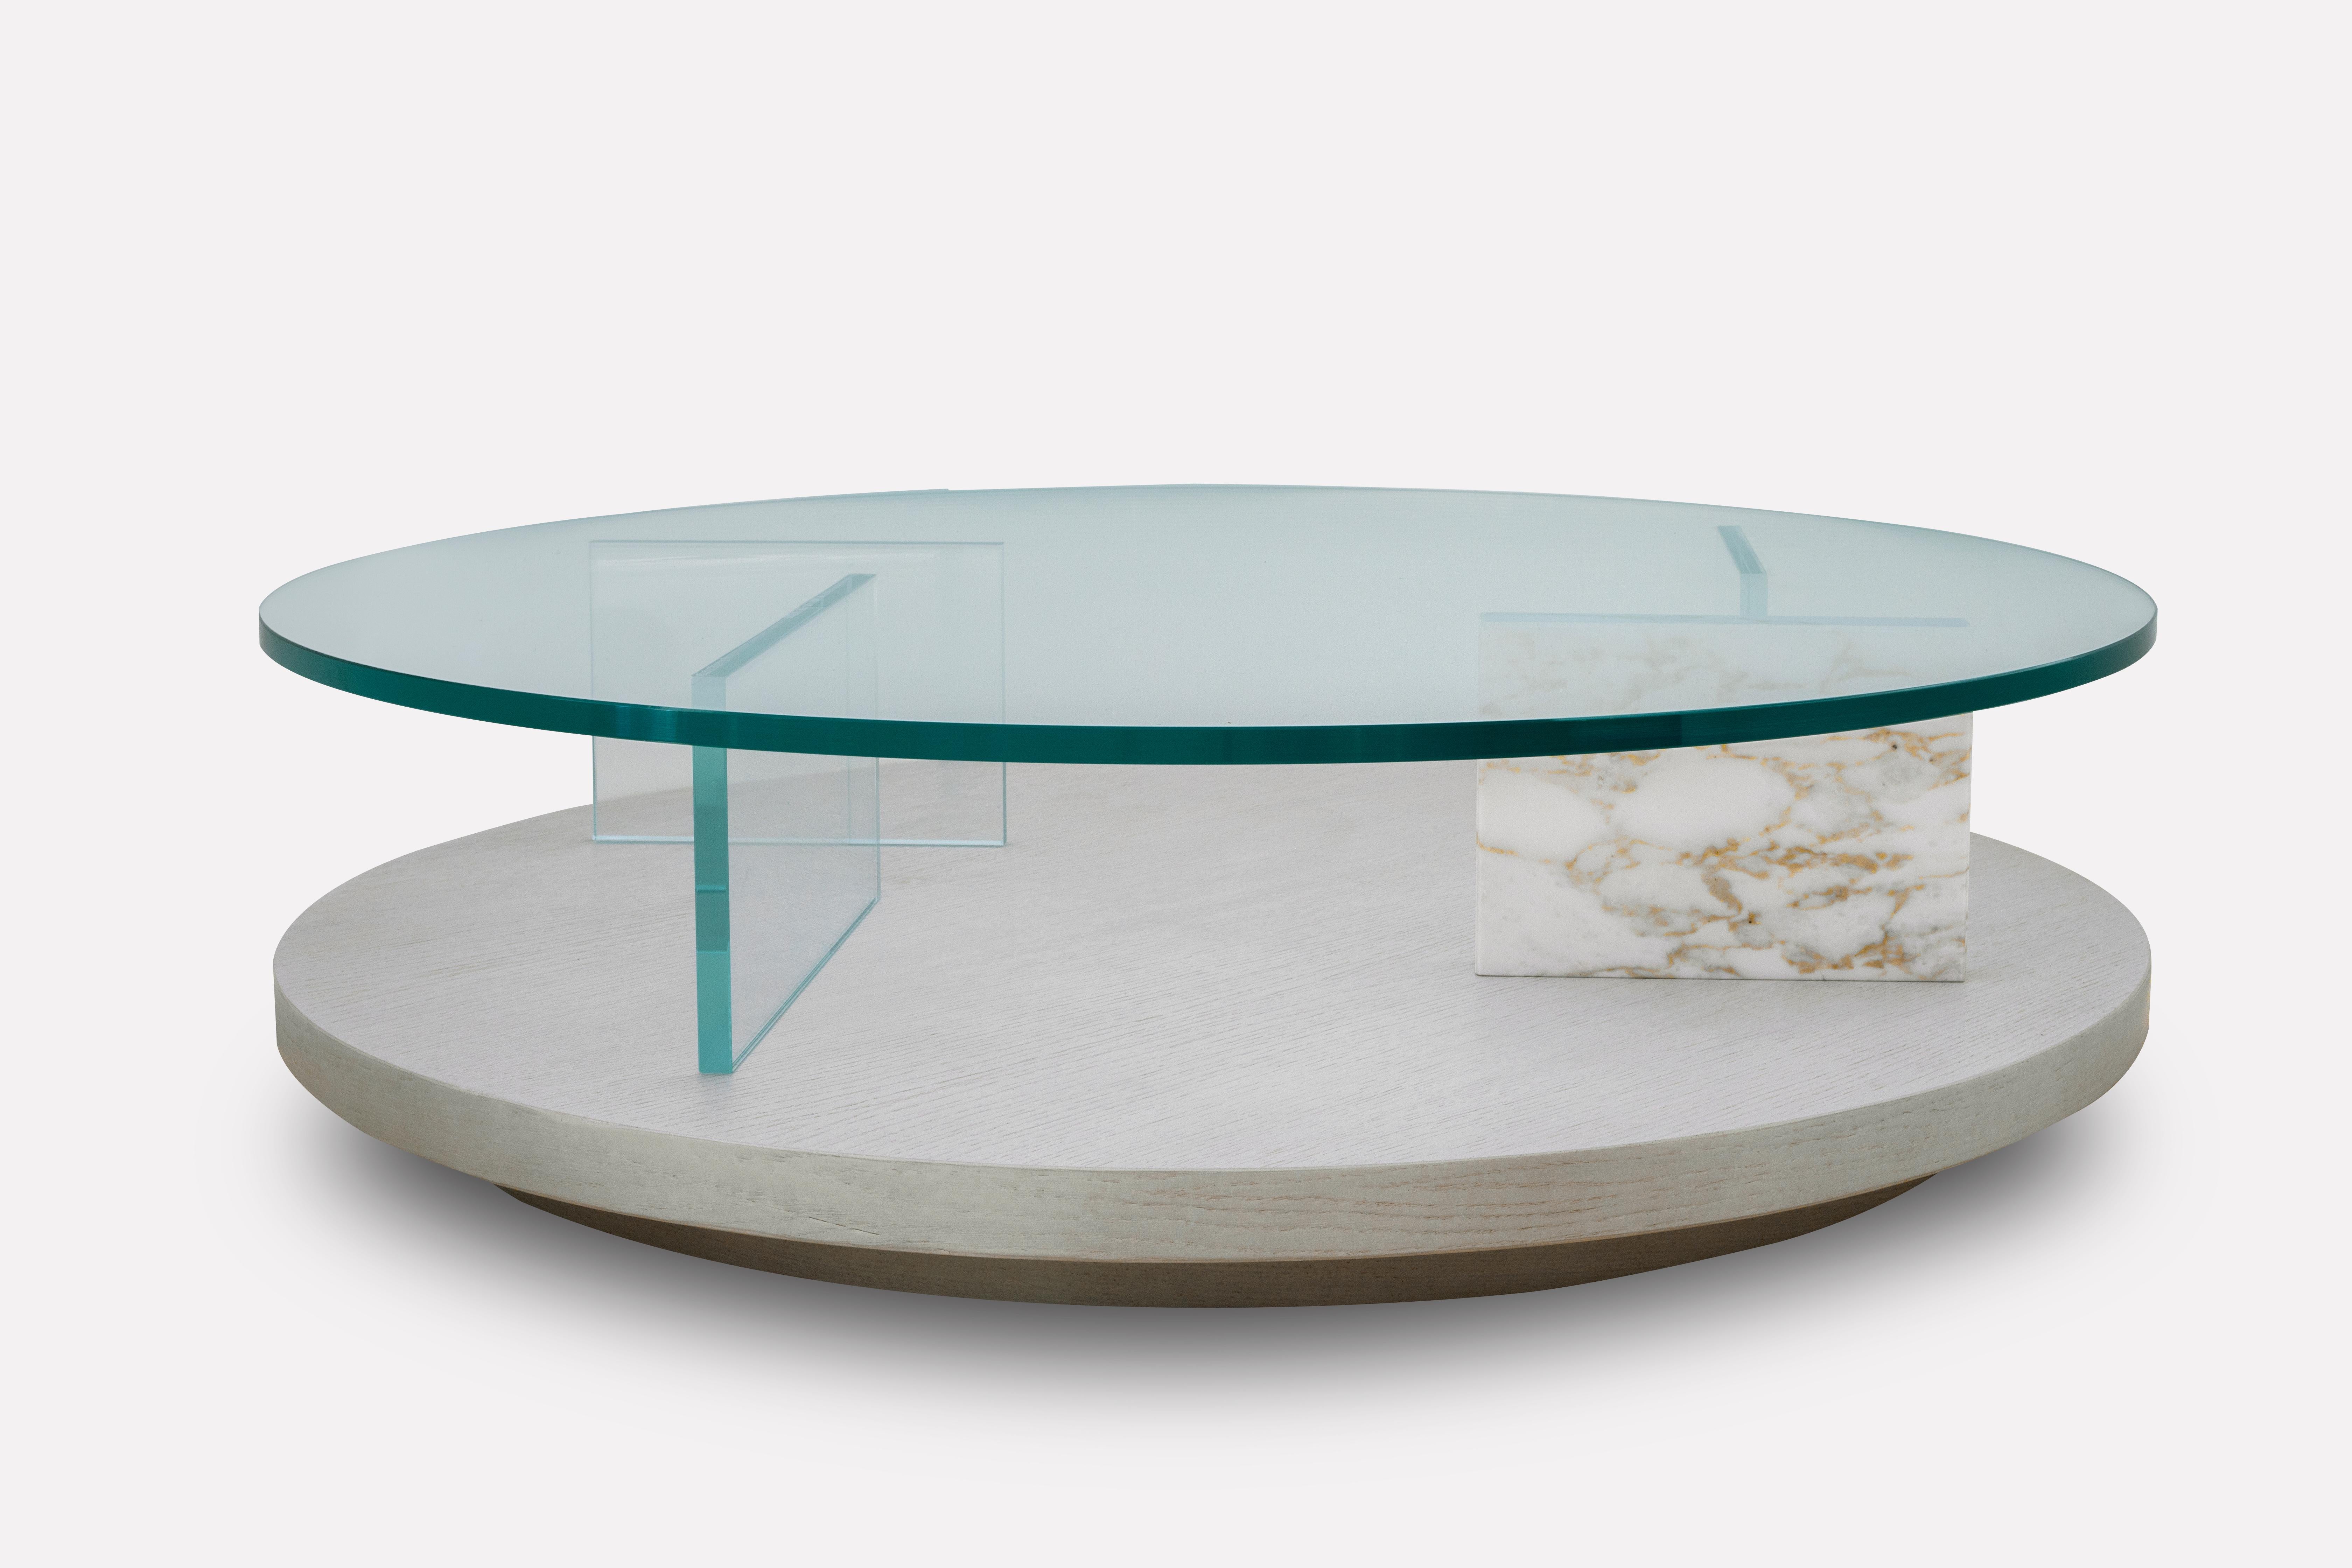 The clear and purist design of the PURO coffee table follows a modern approach that elevates the combination of wood and glass with a protagonist divider of Italian marble.

As shown Wood: White Milk Oak Glass: Clear Marble: Calacatta